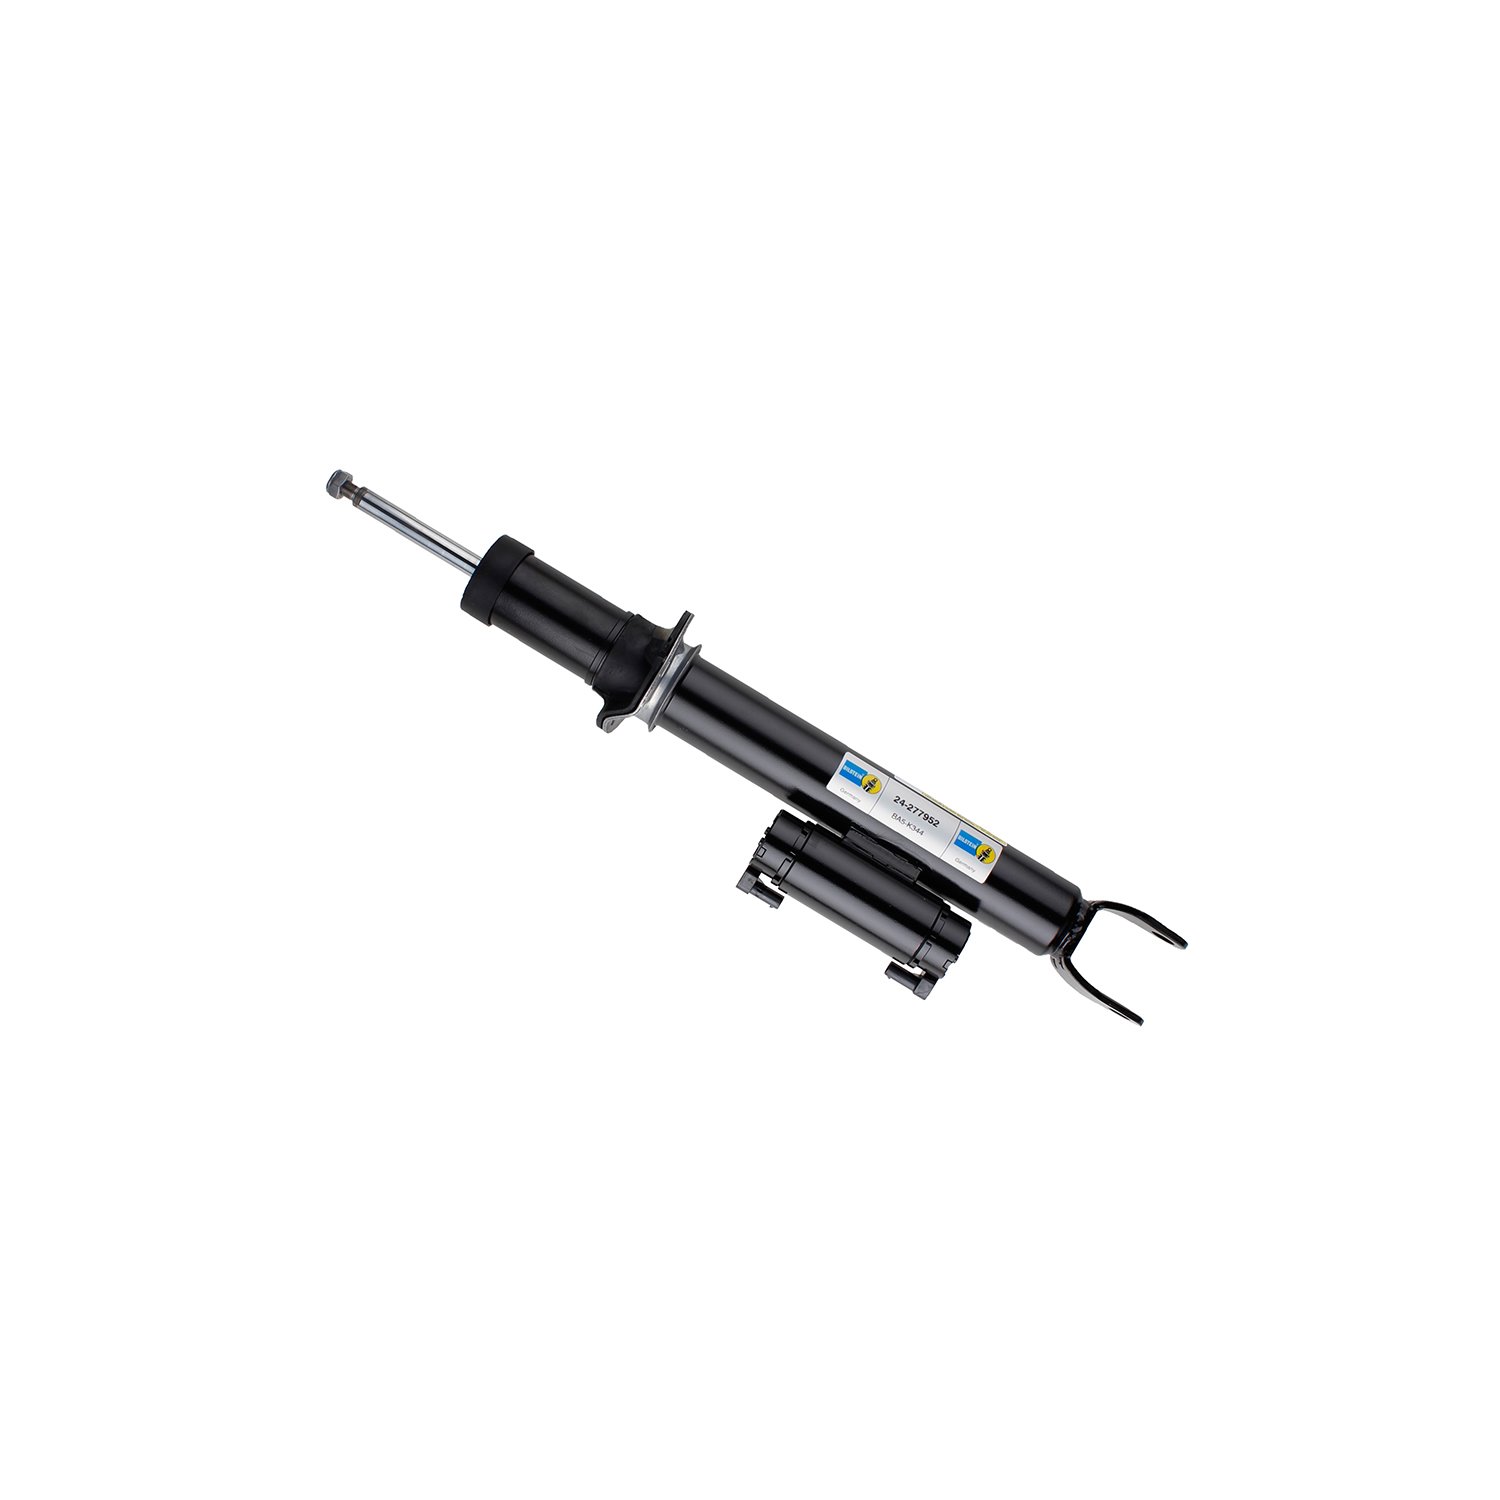 B4 OE Replacement (DampTronic) - Shock Absorber